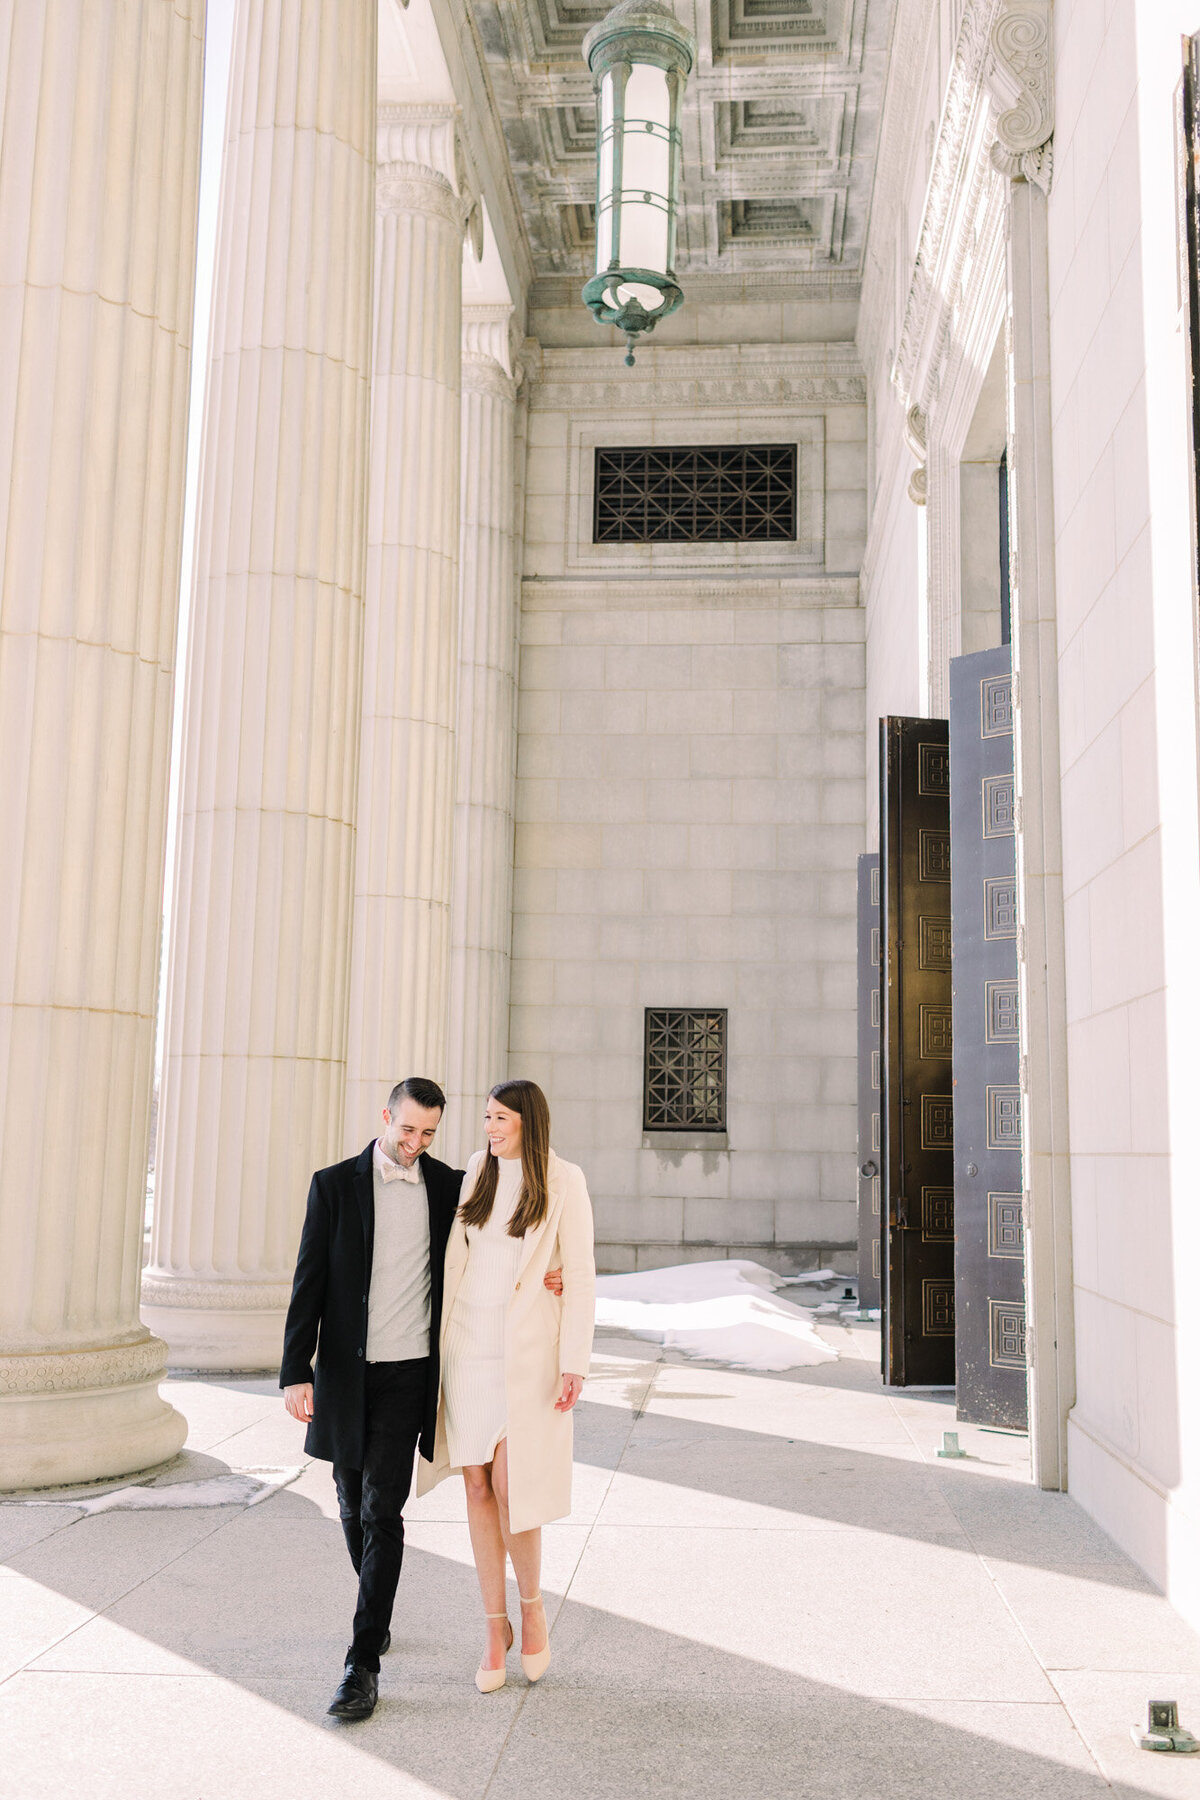 Museum of Science and Industry Engagement Photo